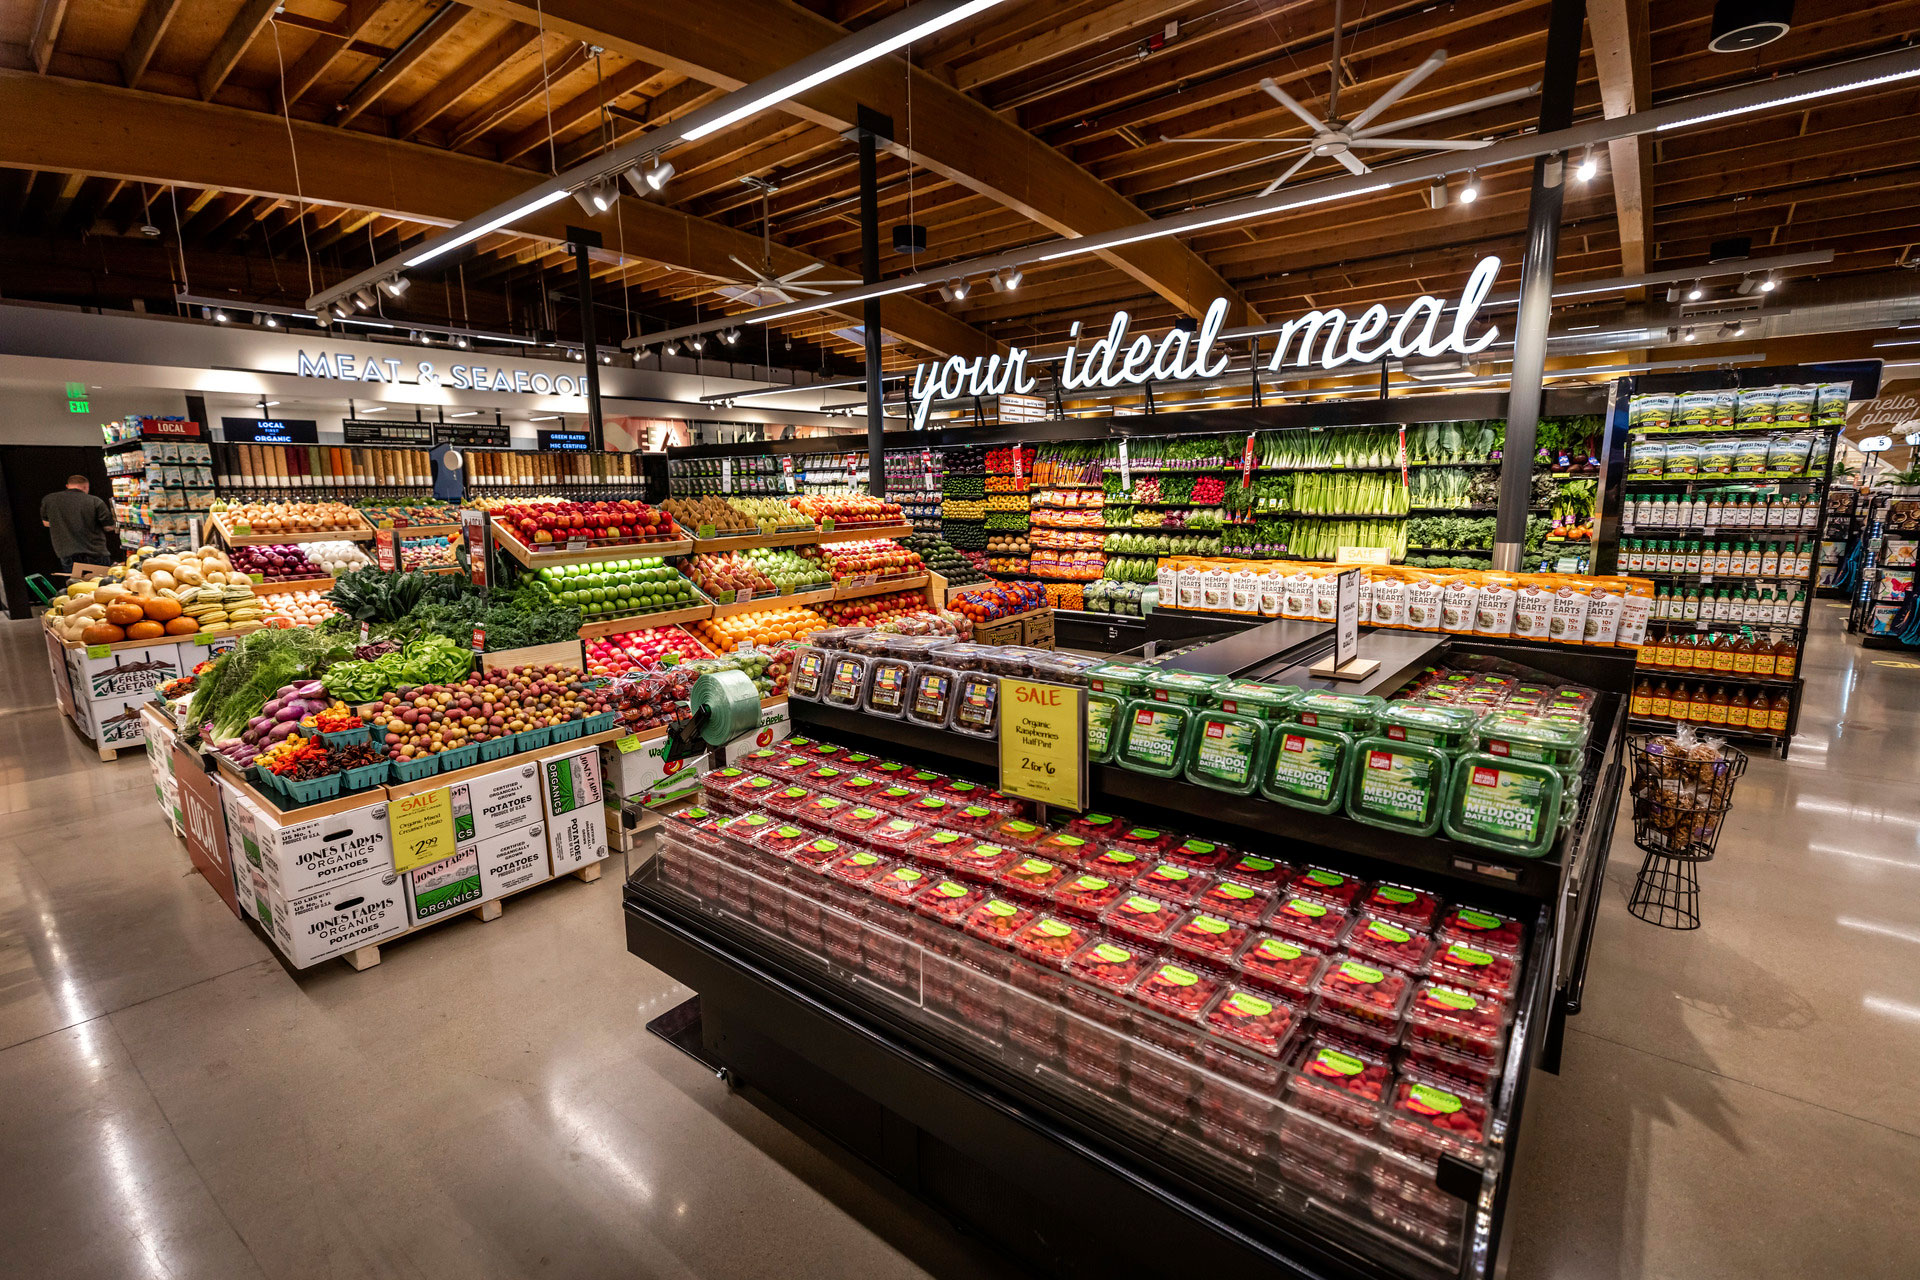 Plan an Event With Whole Foods Market